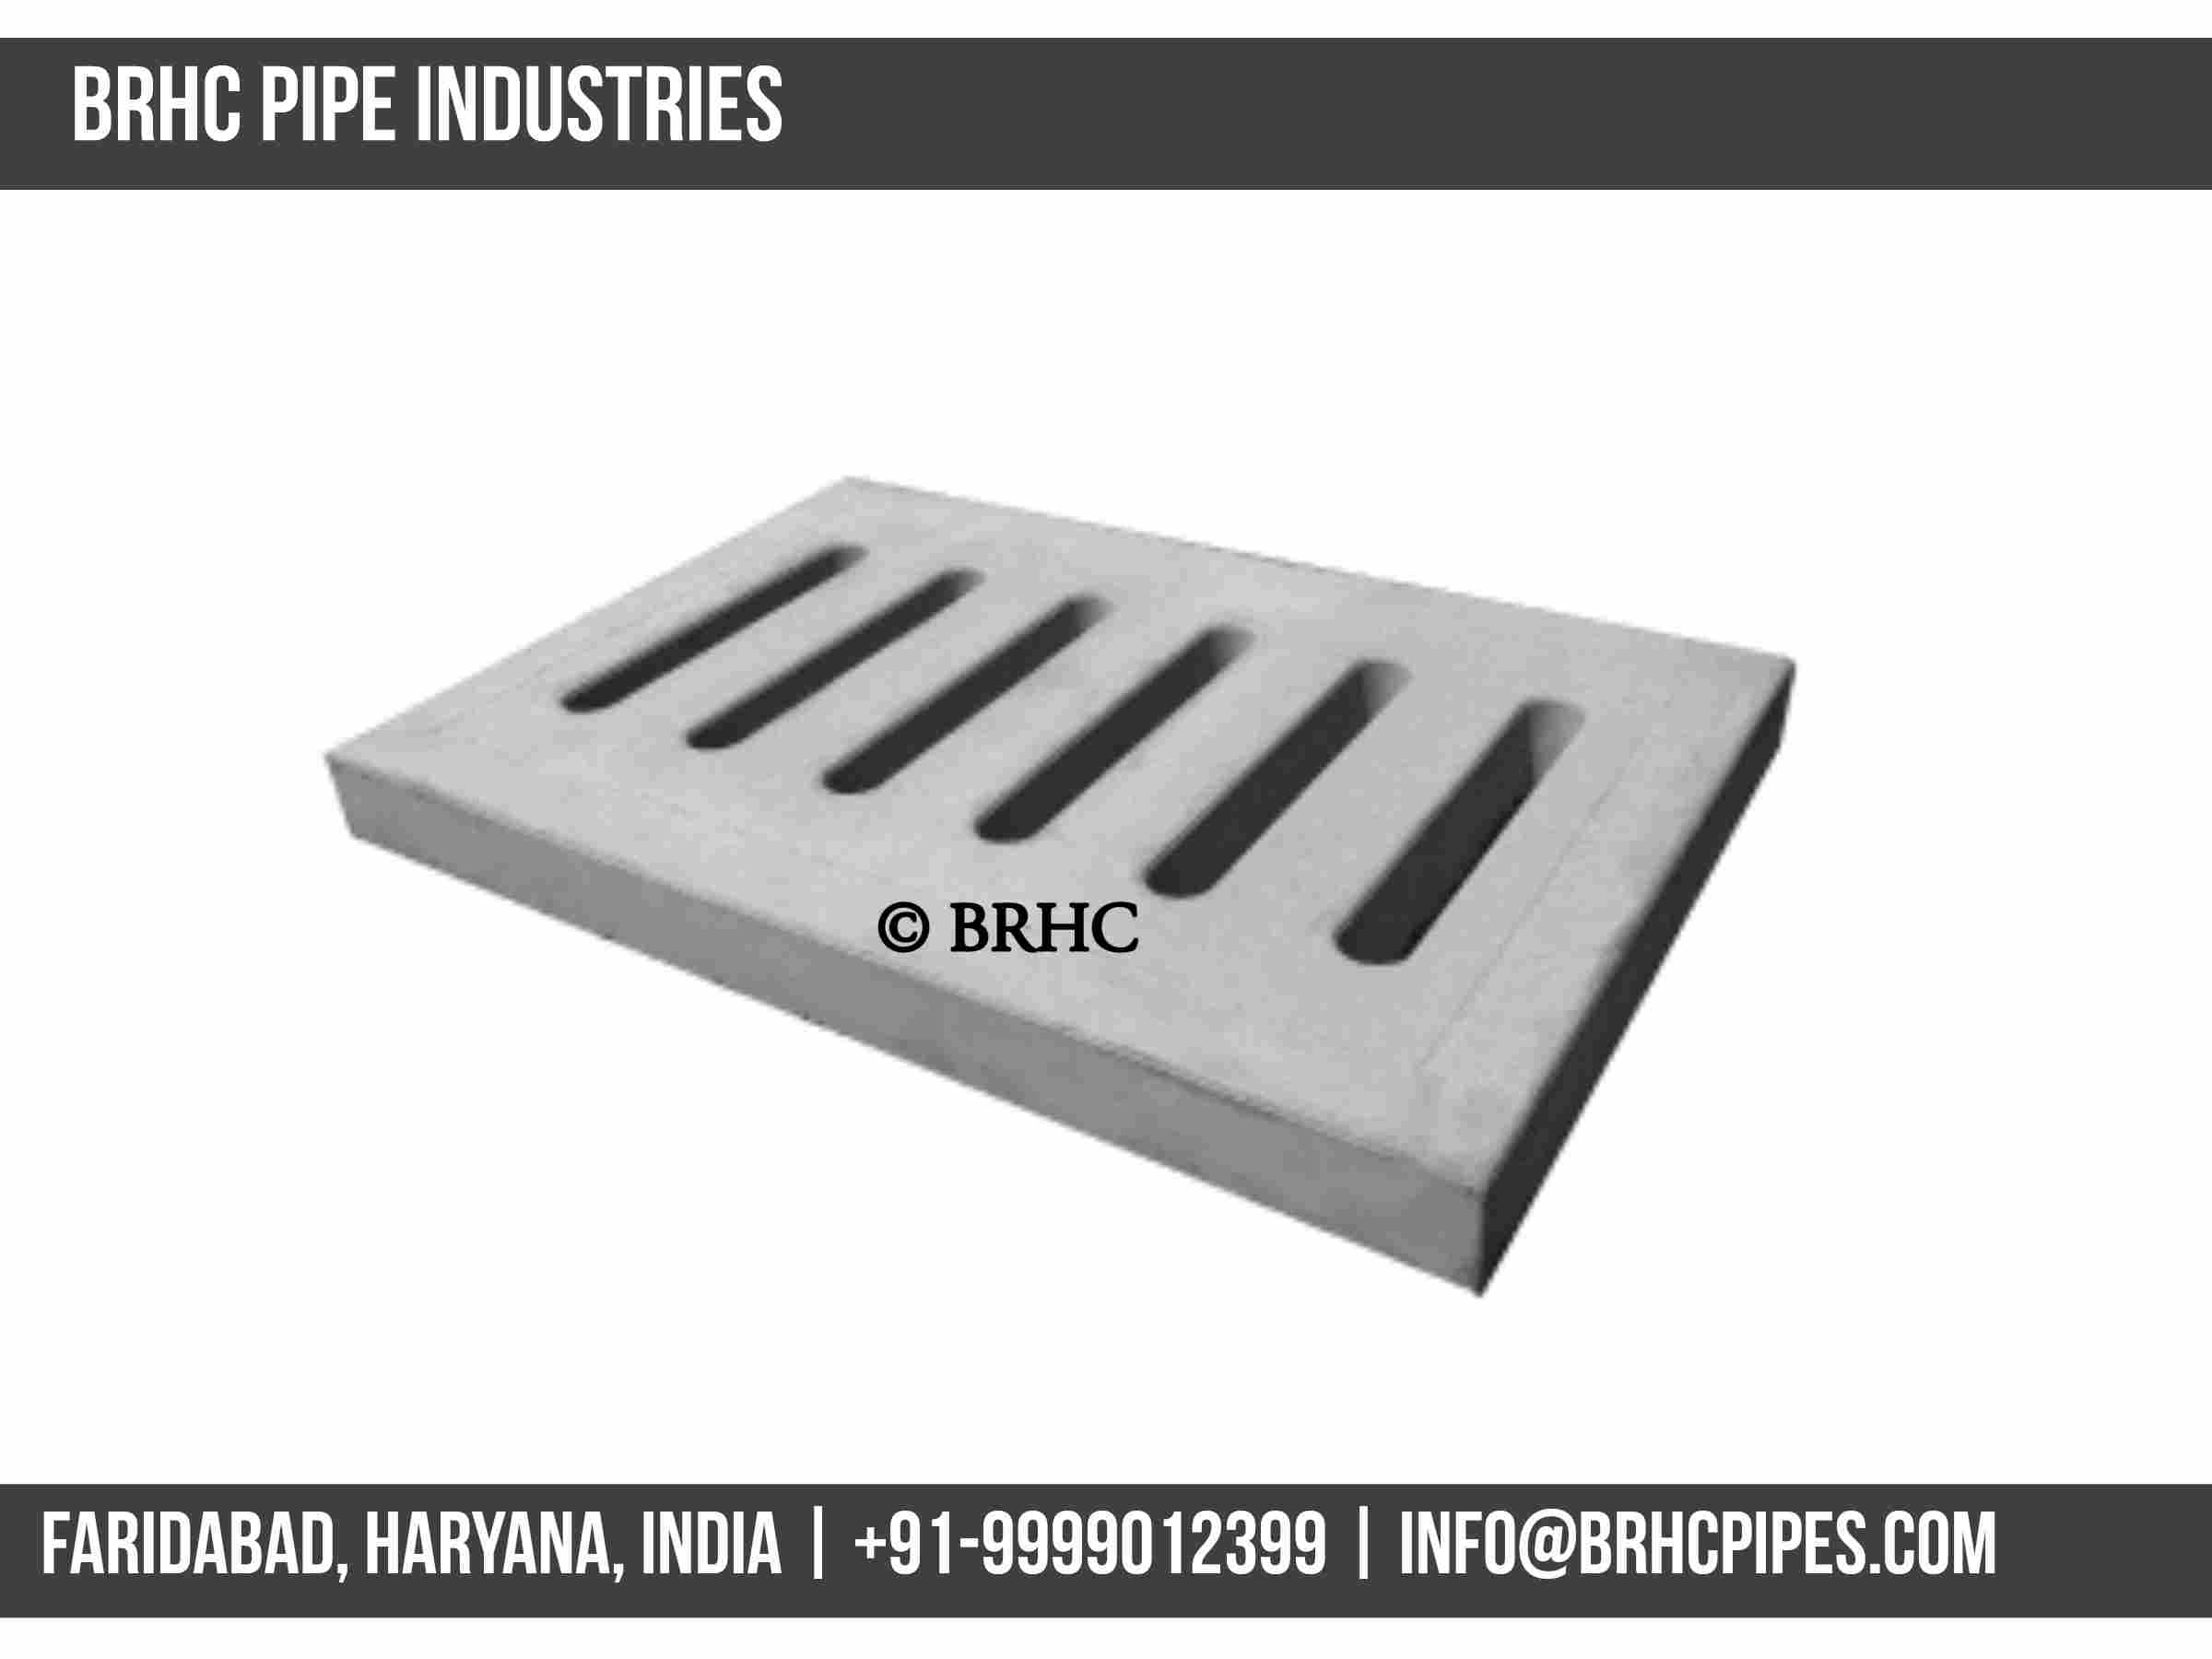 Top Producer of Trench Drain Cover